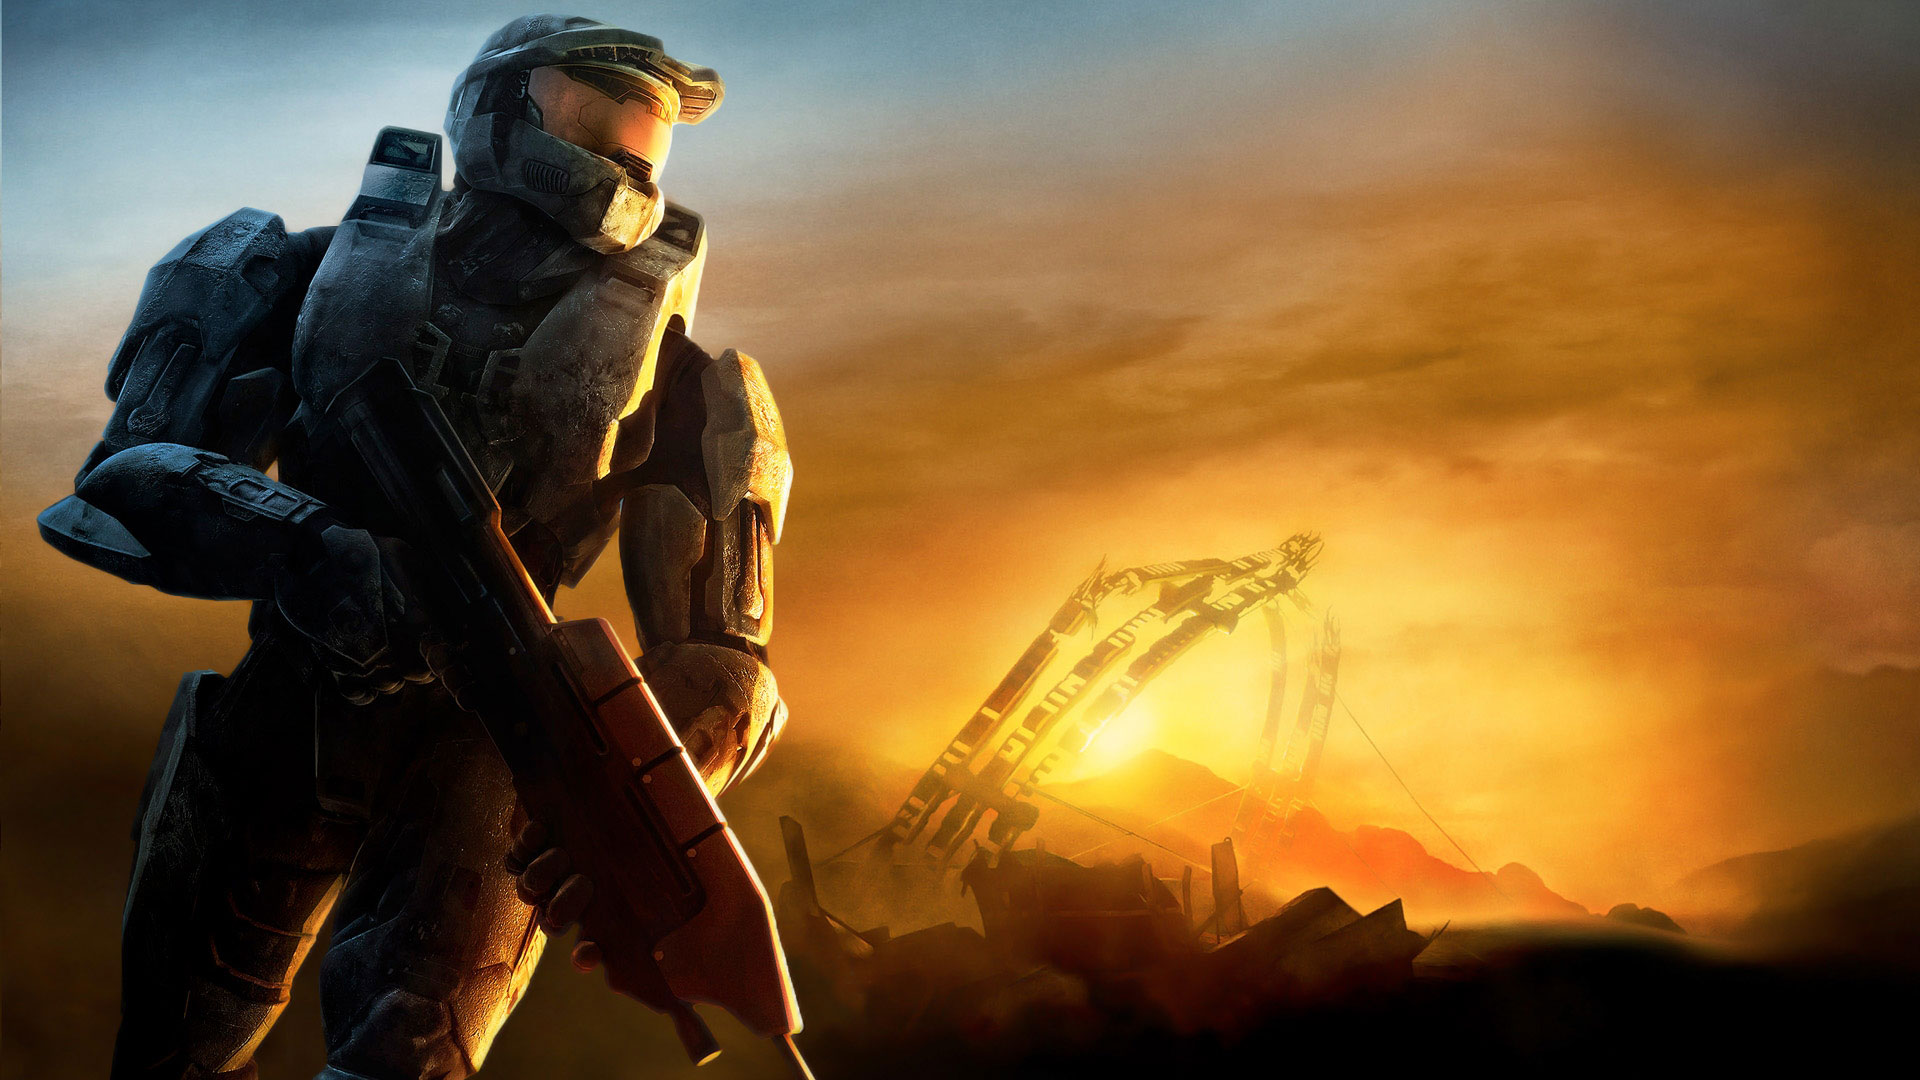 Halo Wallpaper Image Background 1080p With